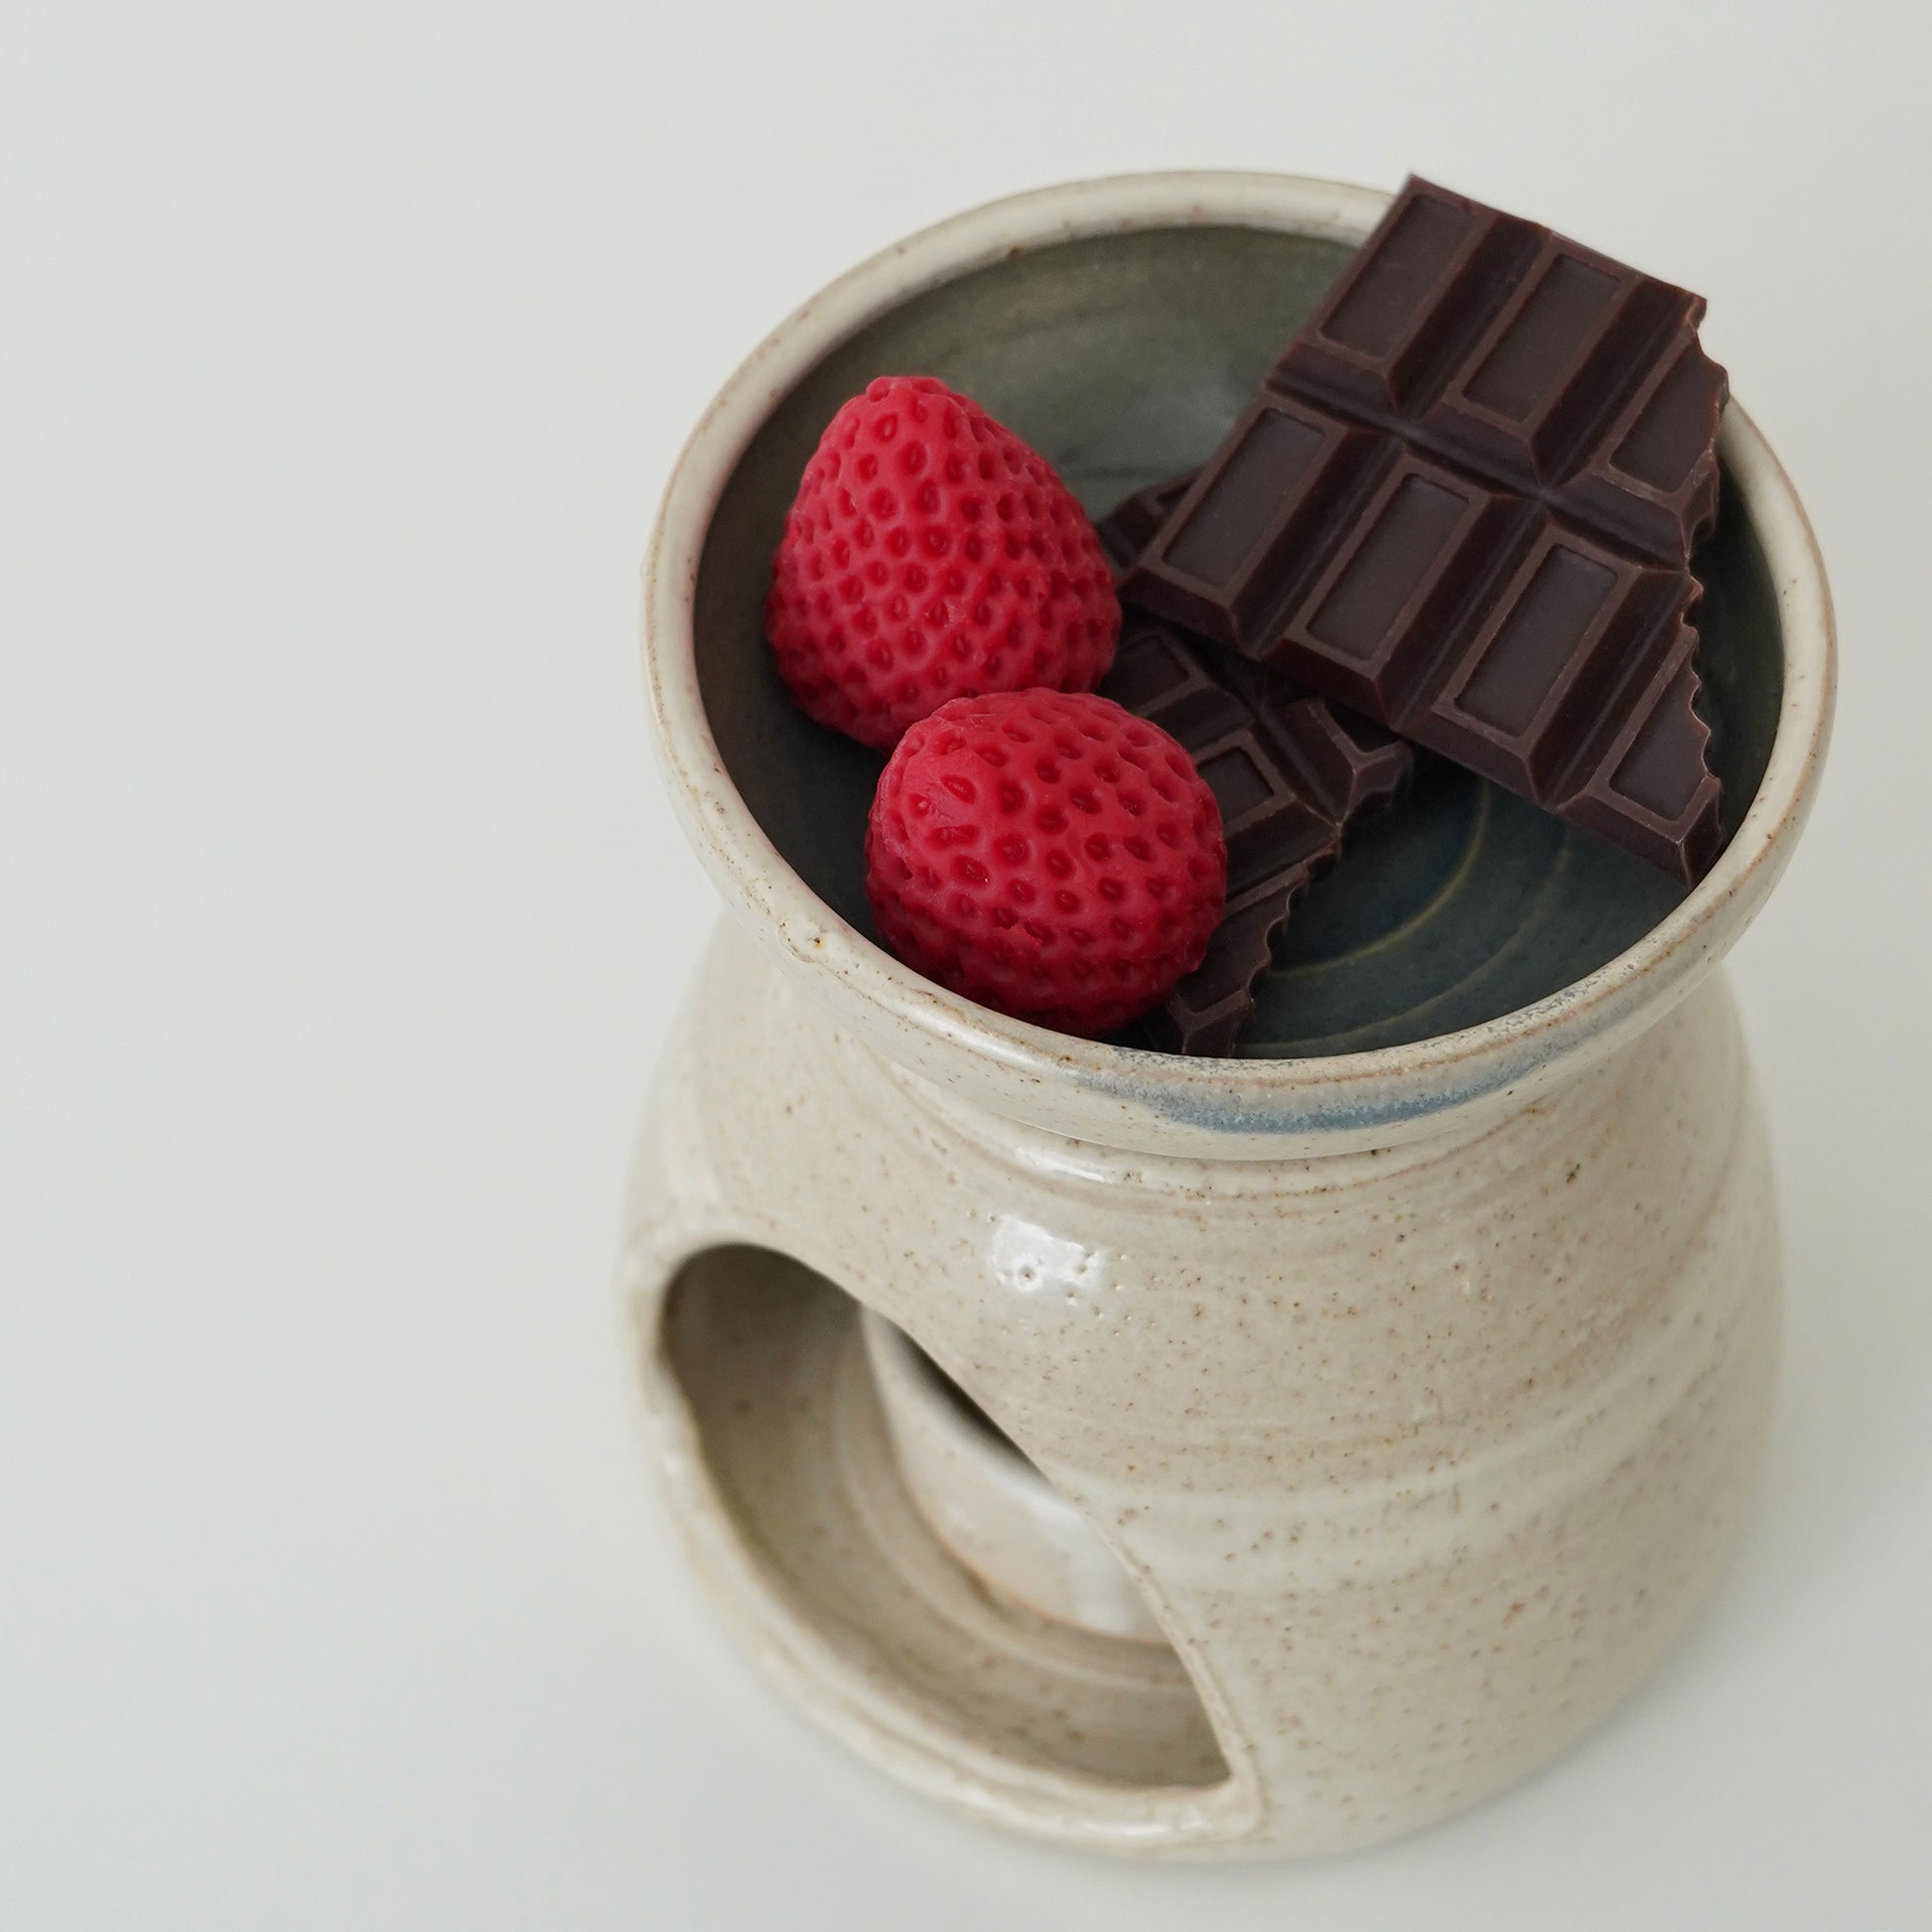 chocolate and strawberry wax melts in a wax warmer